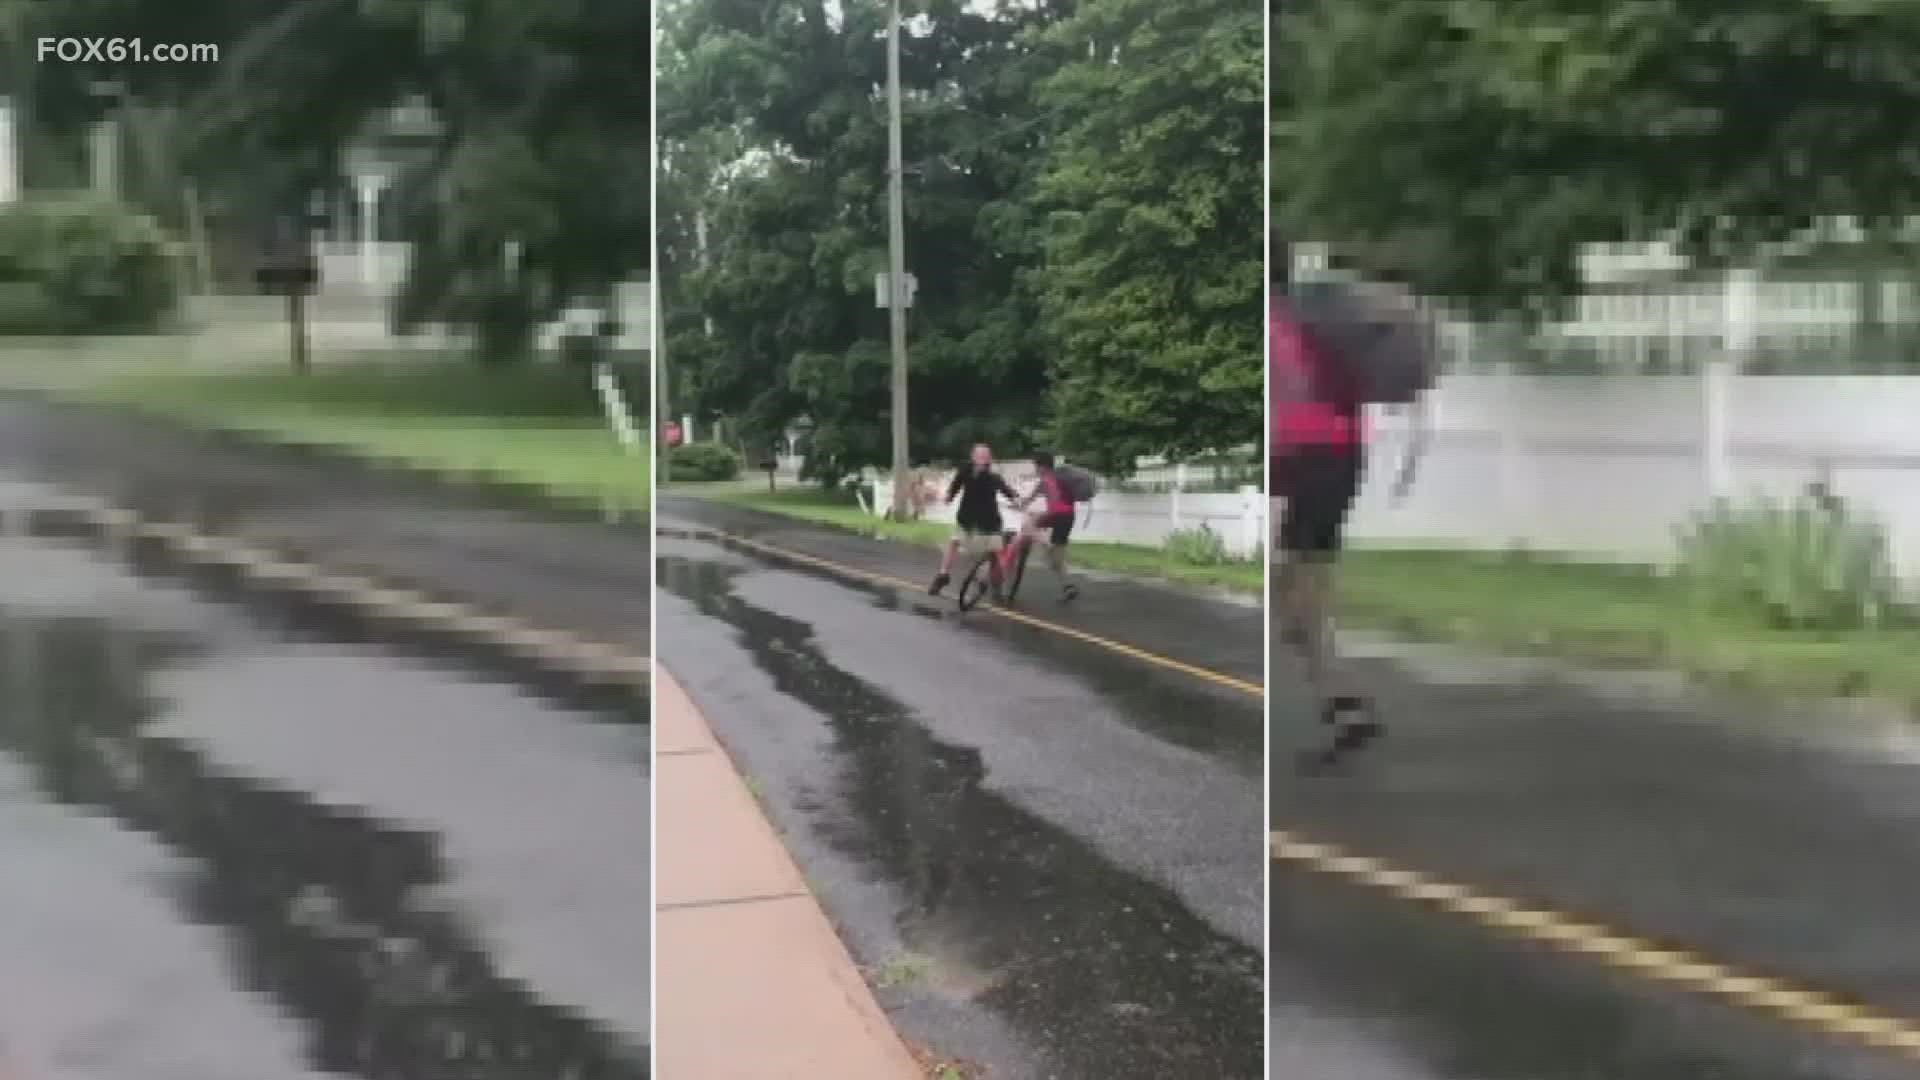 11-year-old Daniel Duncan was pushed off his bike Monday by Jameson Chapman, who shouted obscenities at the boy.